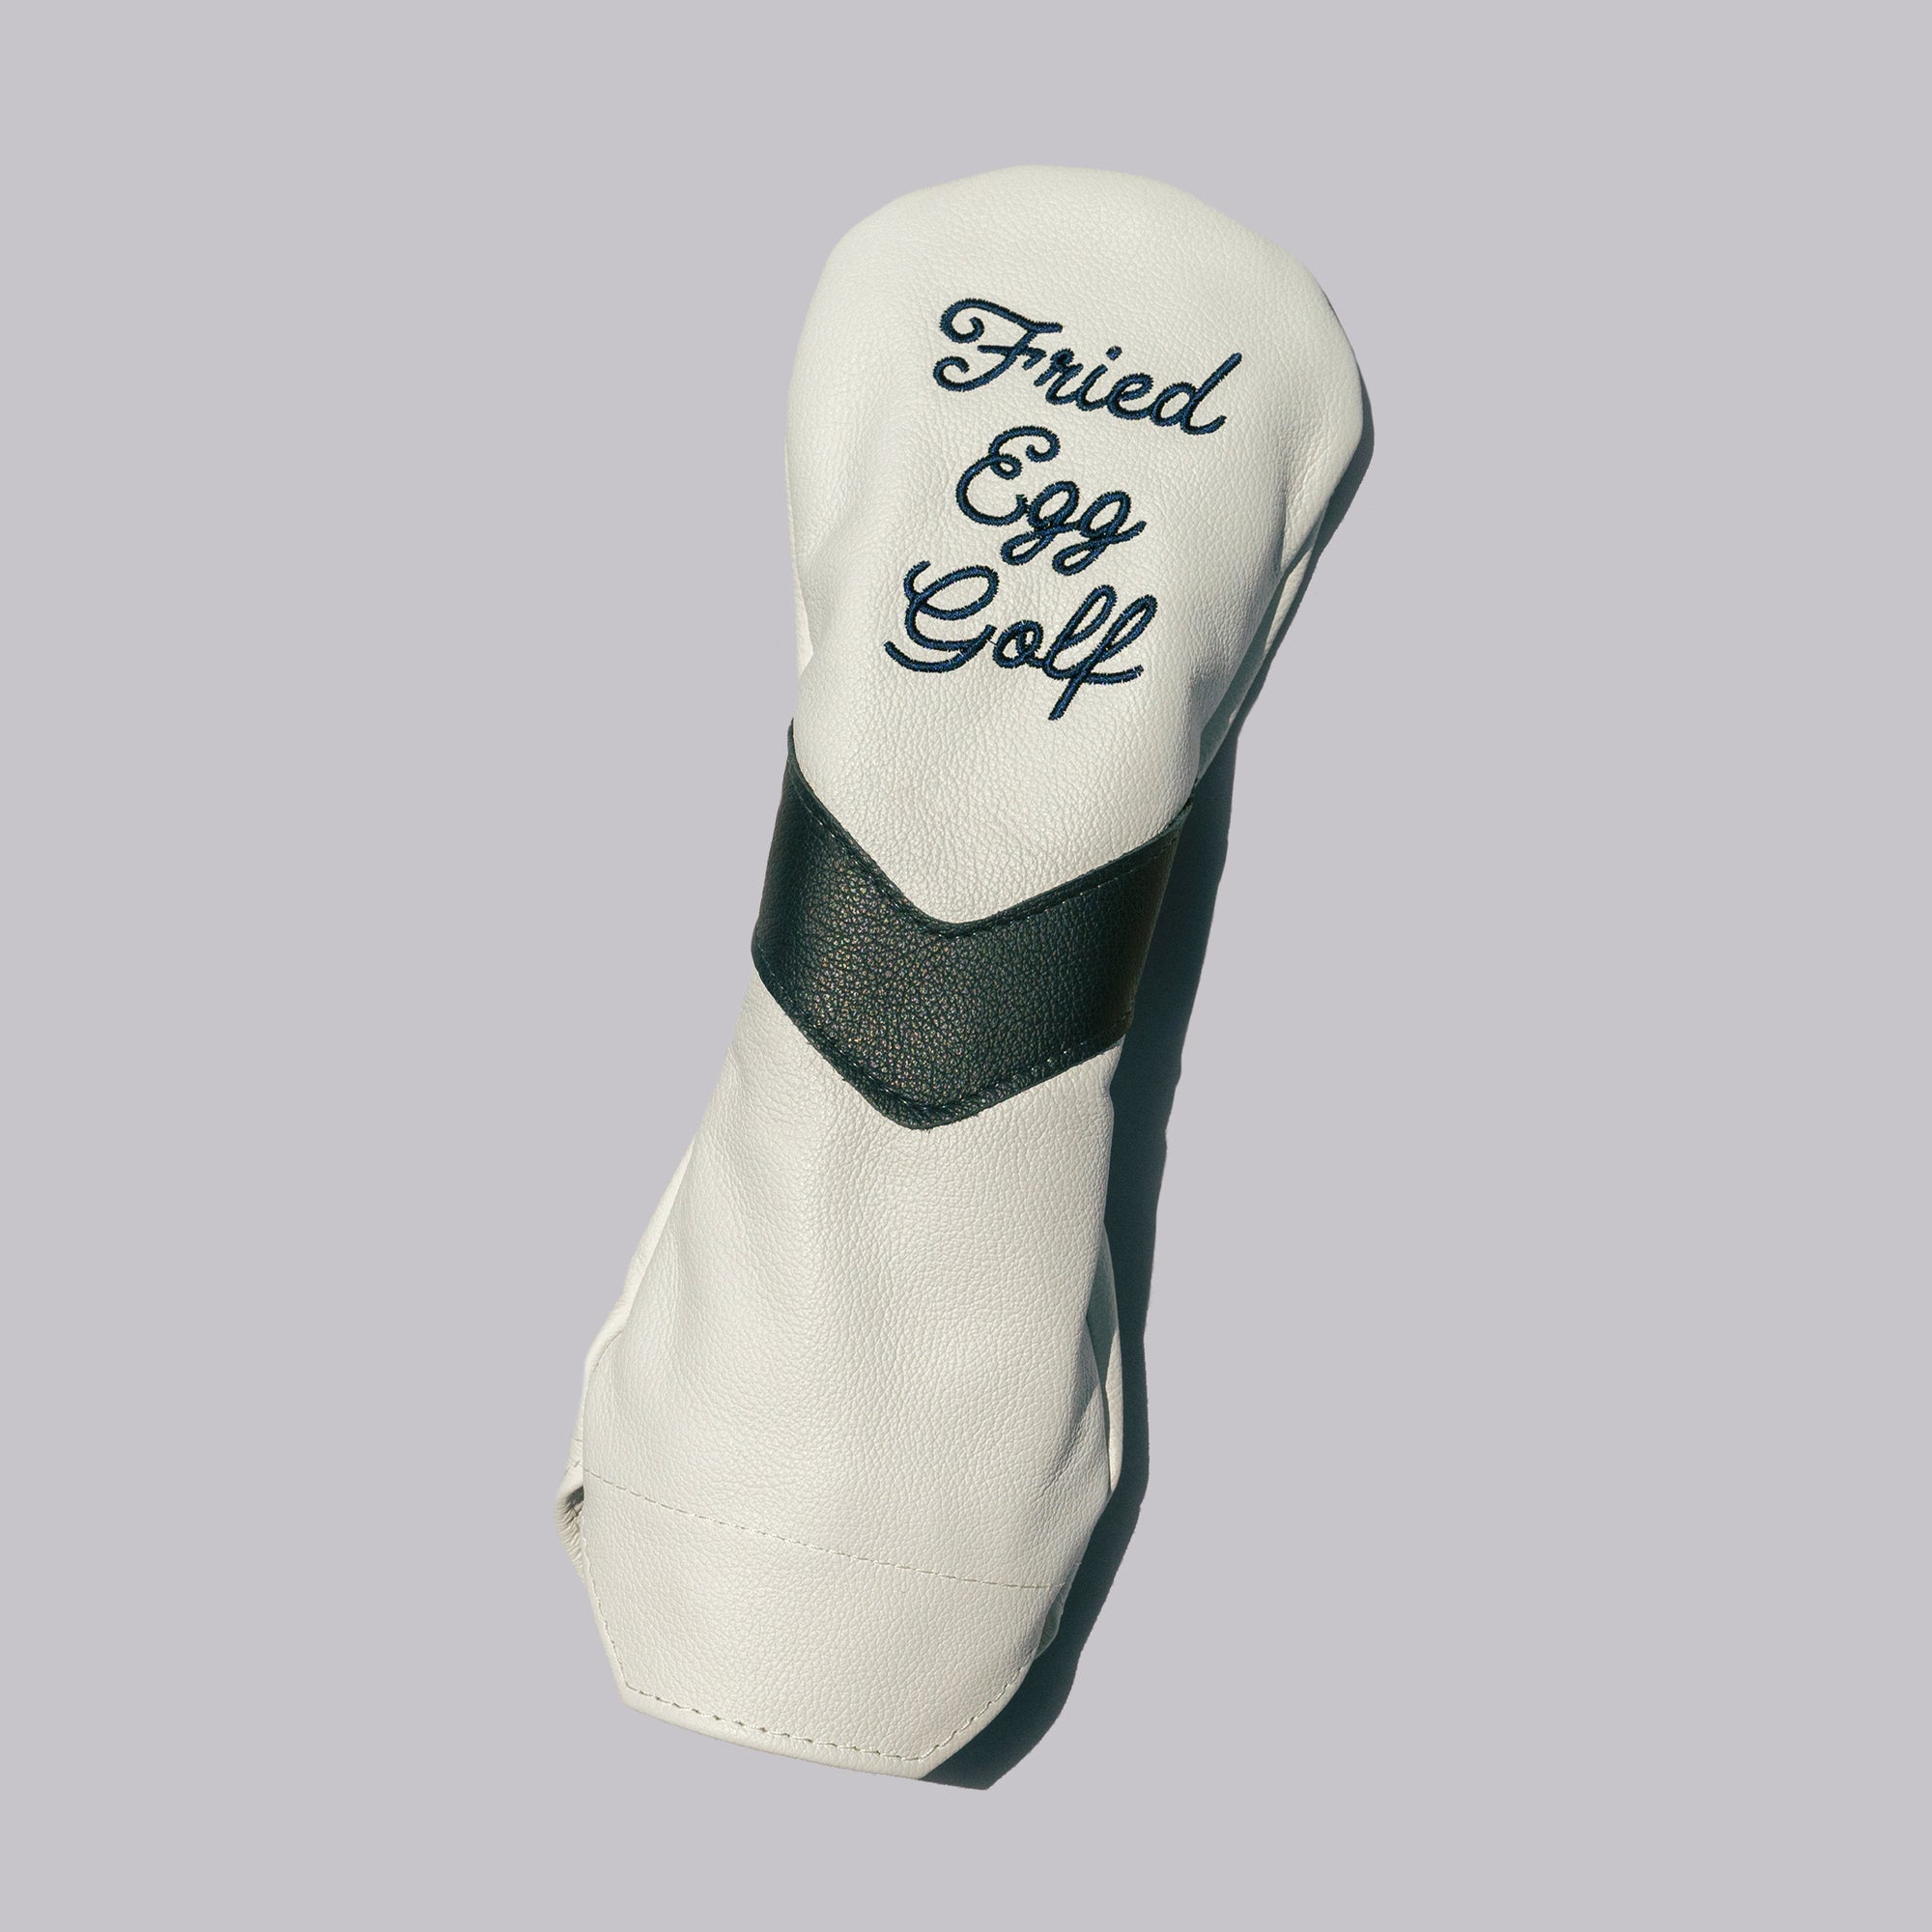 Fried Egg Golf White Leather Headcover - Fairway Wood